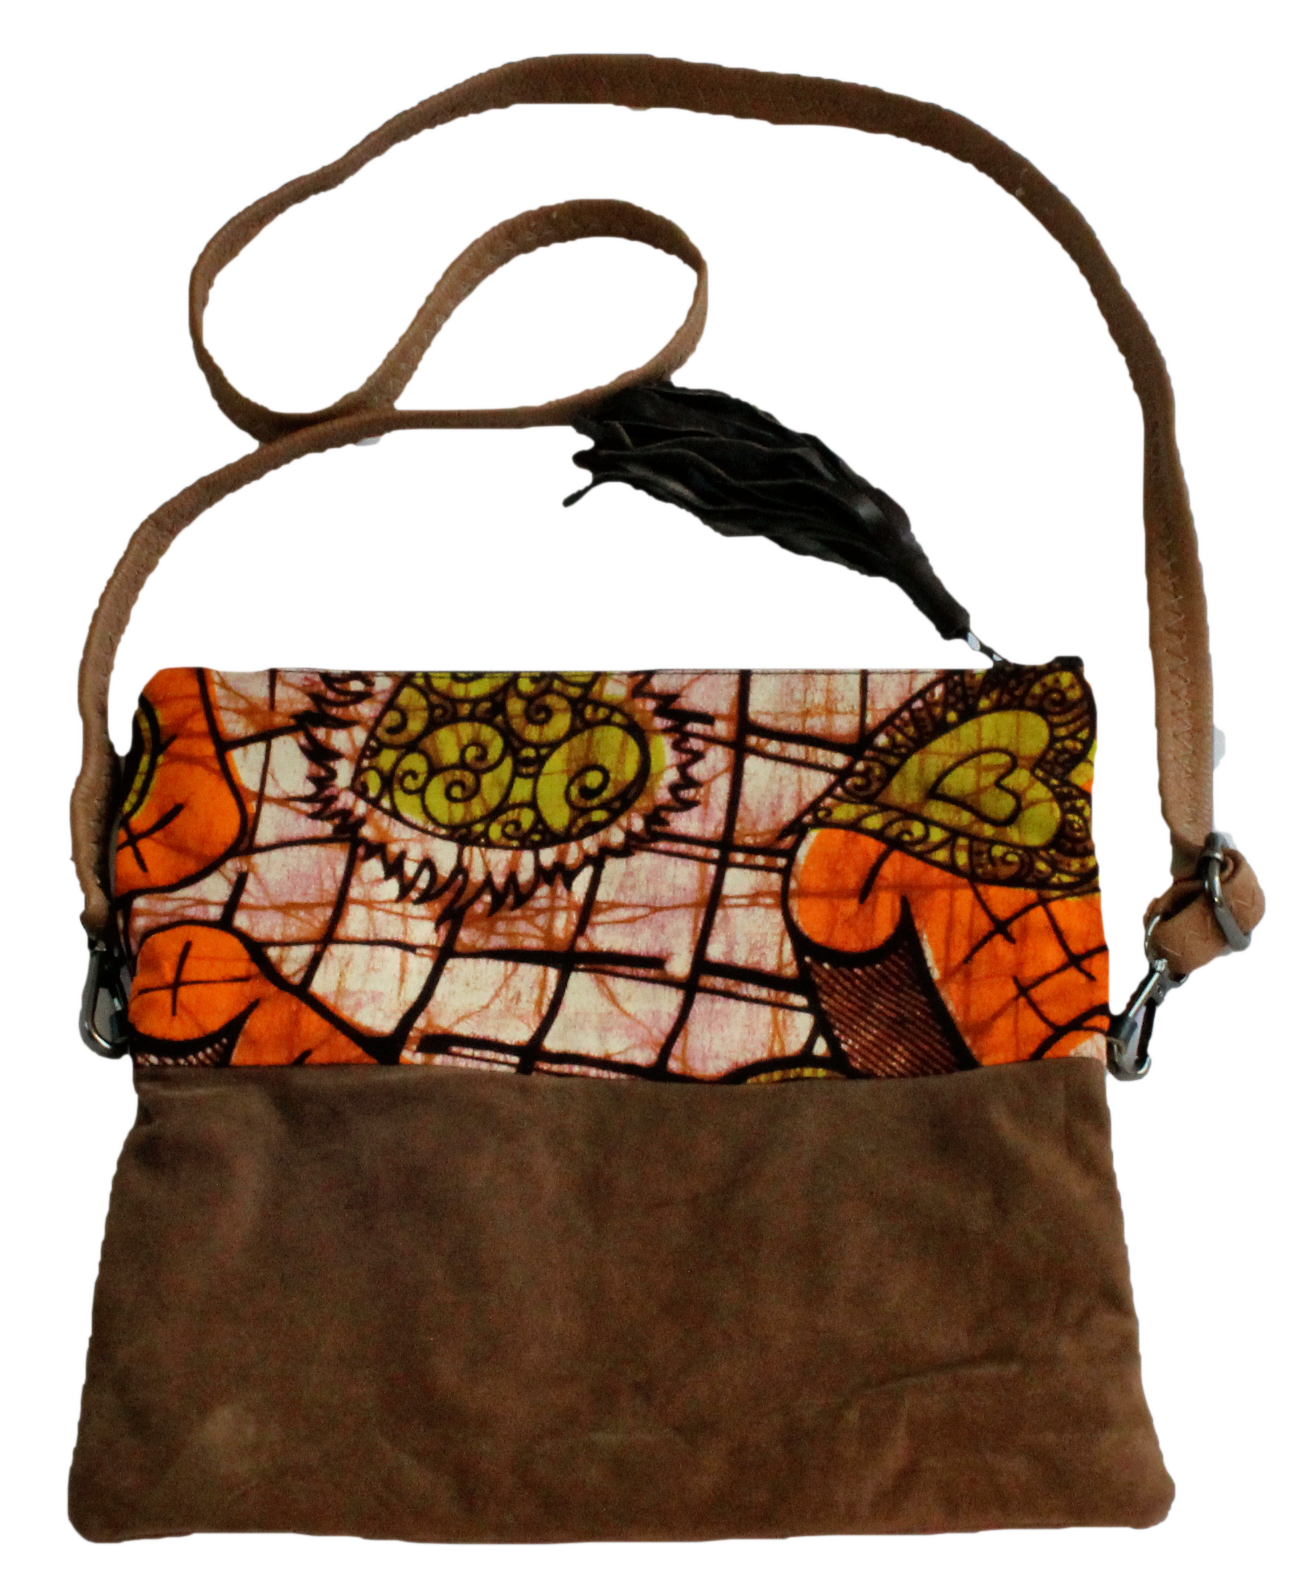 Handmade crossbody bag, upcycled leather, African print, Kitenge fashion, Ankara fashion, brown suede, with strap